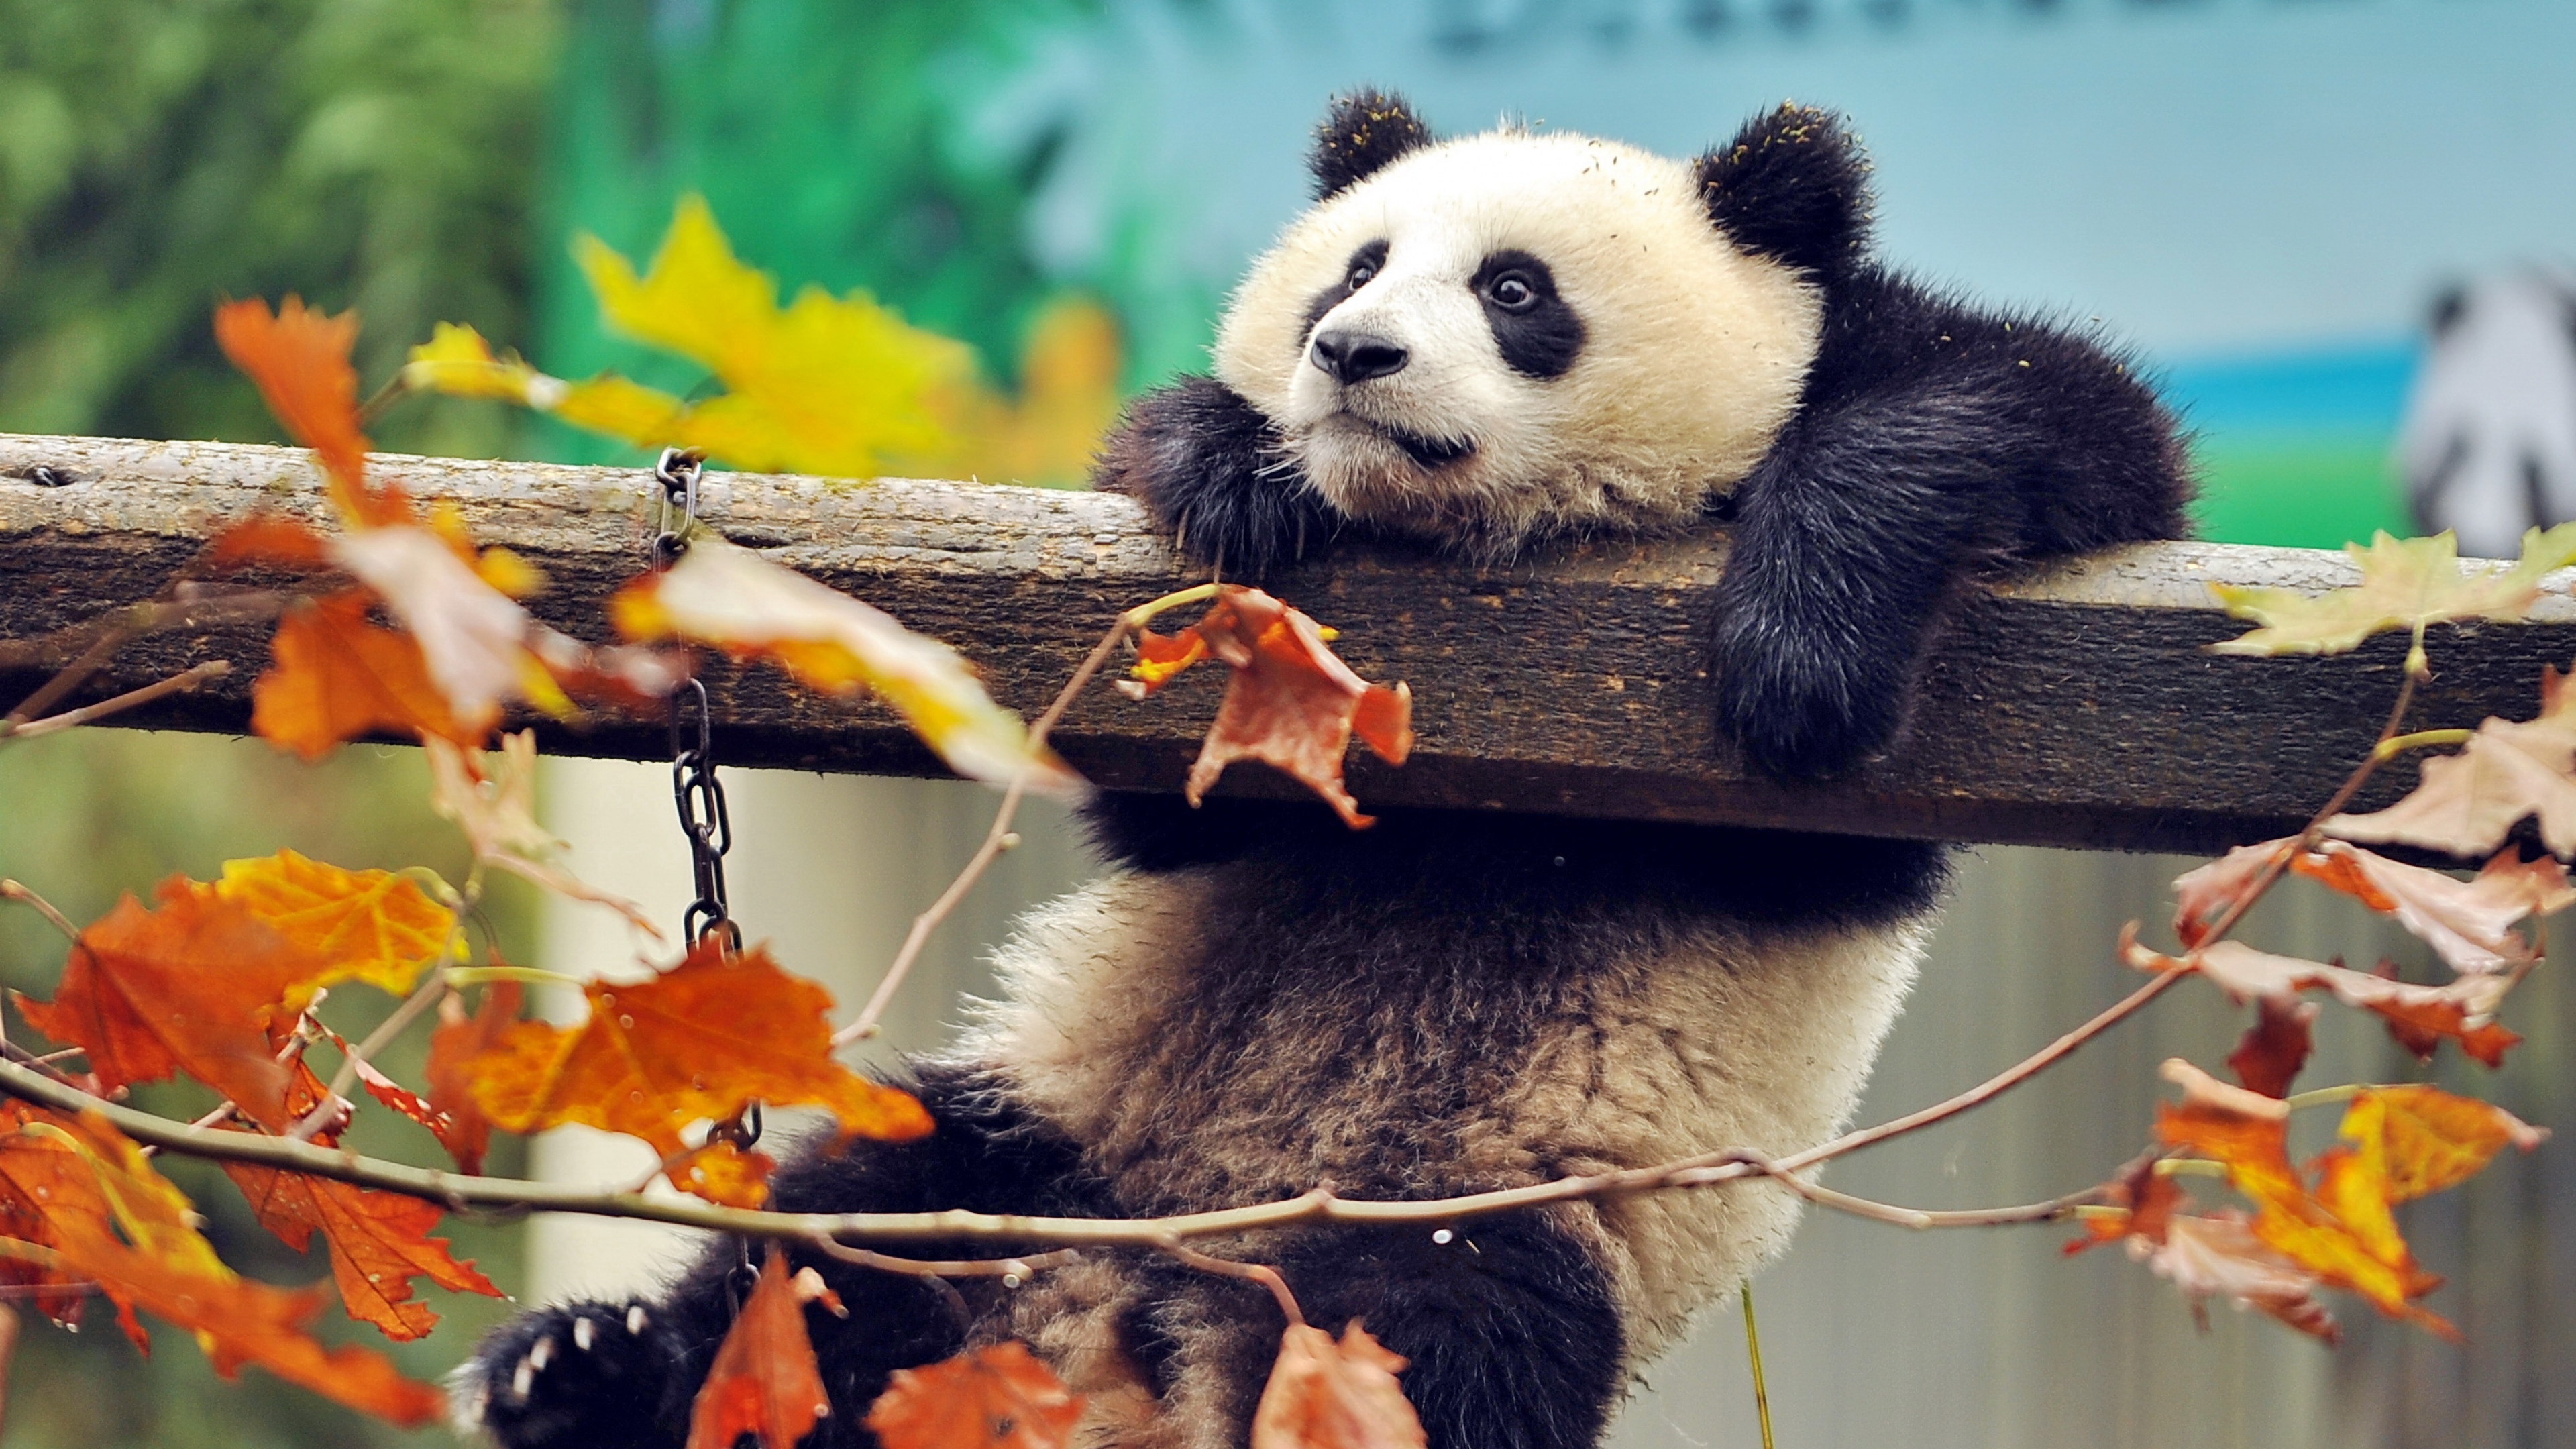 Cute panda hd animals k wallpapers images backgrounds photos and pictures